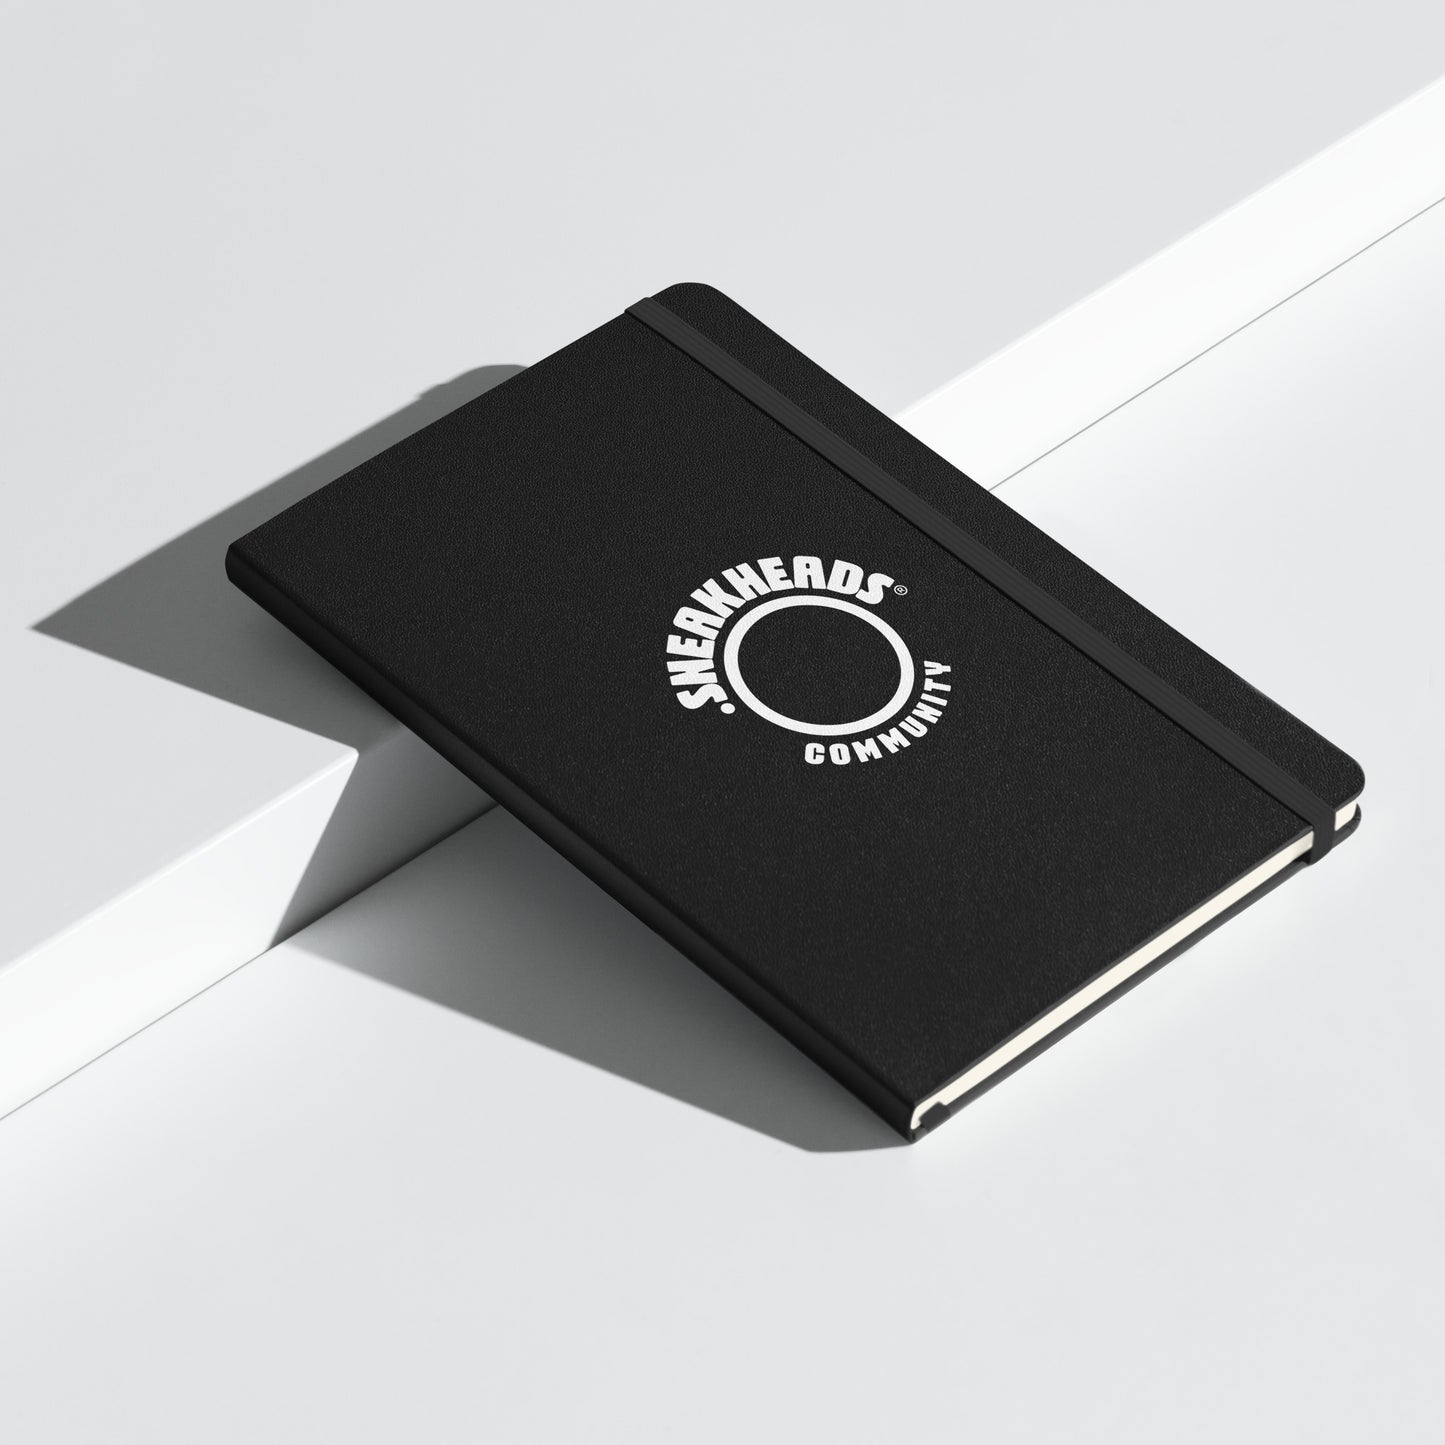 SneakHeads® Community hardcover bound notebook